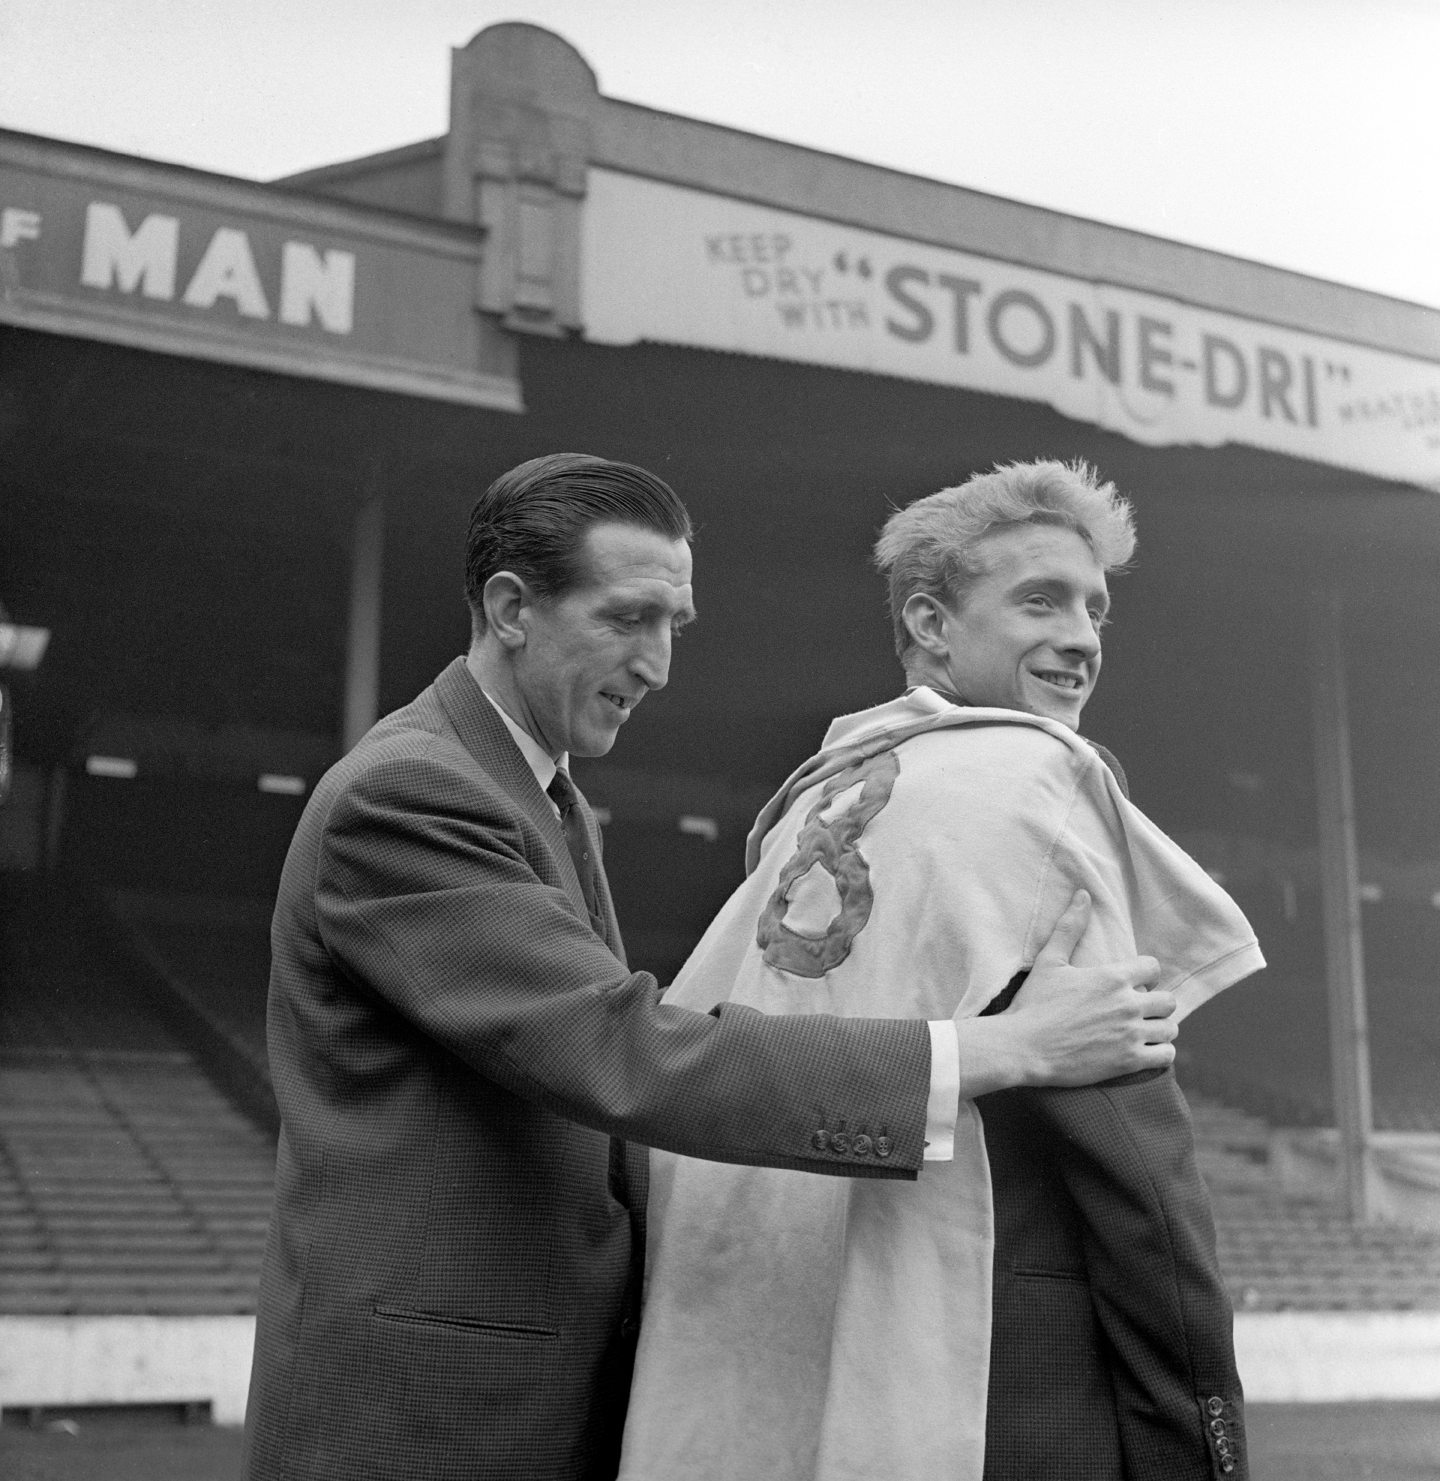 Ken Barnes, captain of Manchester City, with Denis Law after he signed for a record transfer fee in 1960.